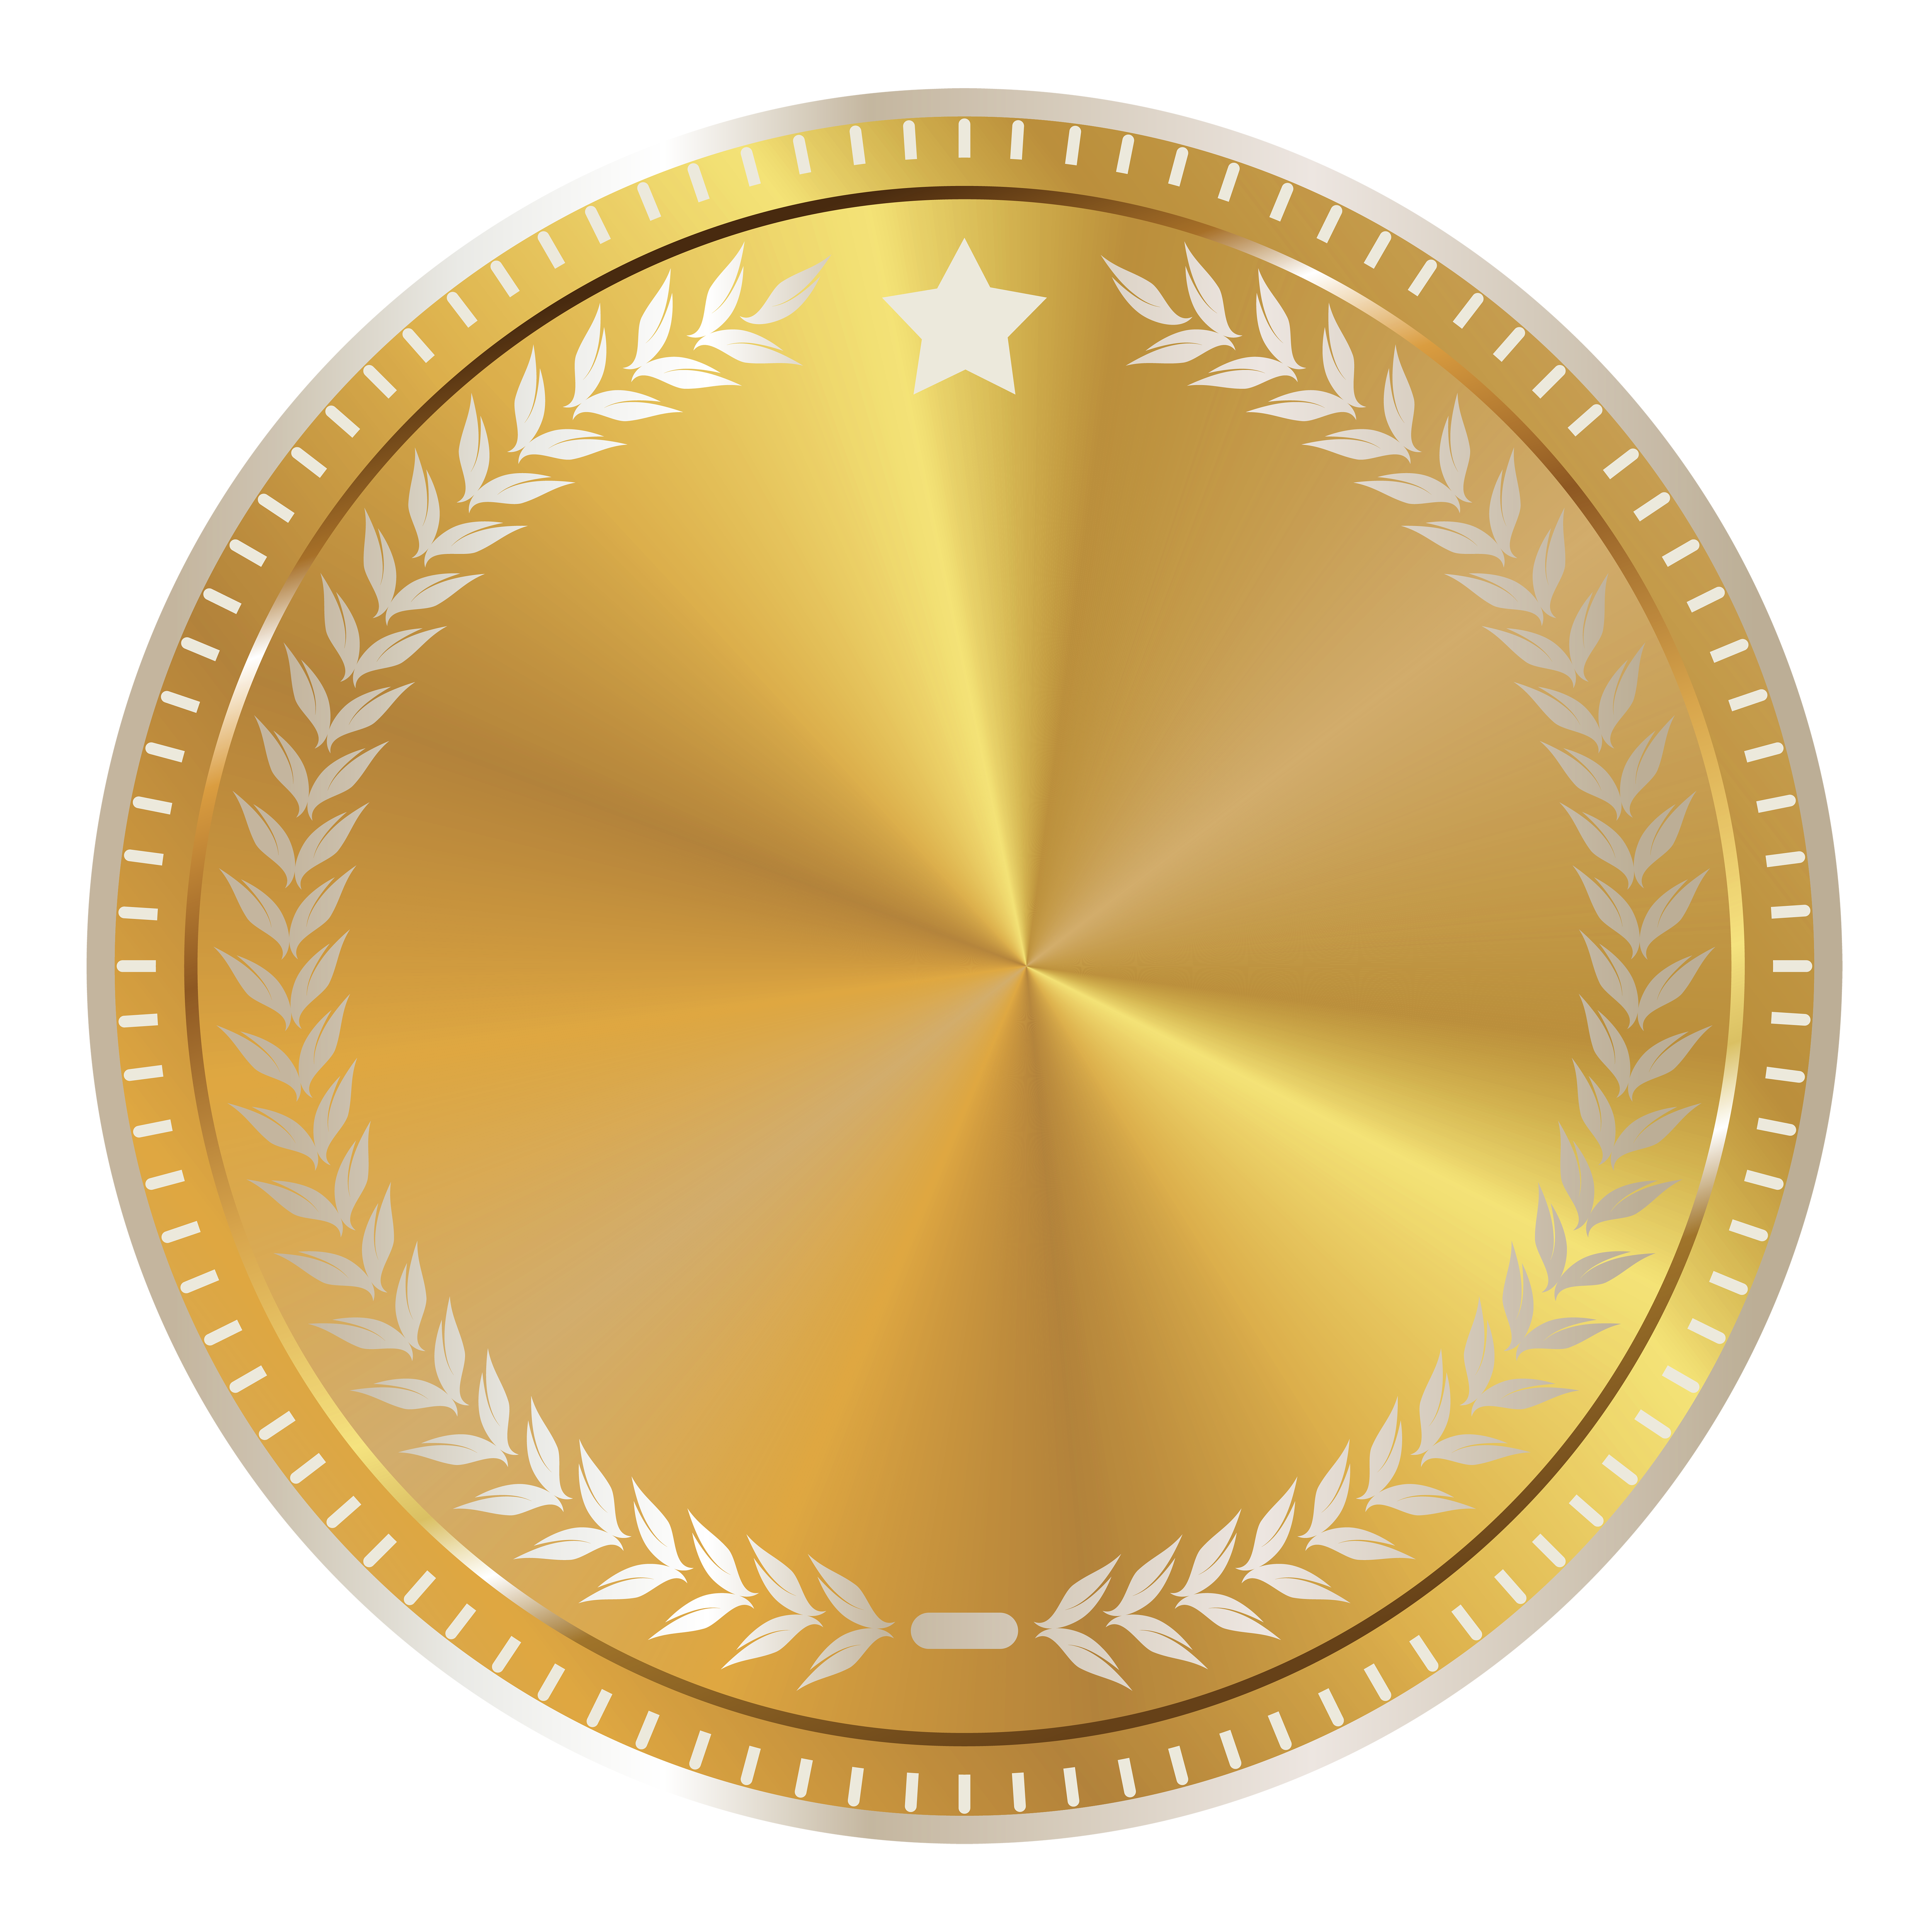 Free Gold Seal Cliparts, Download Free Clip Art, Free Clip